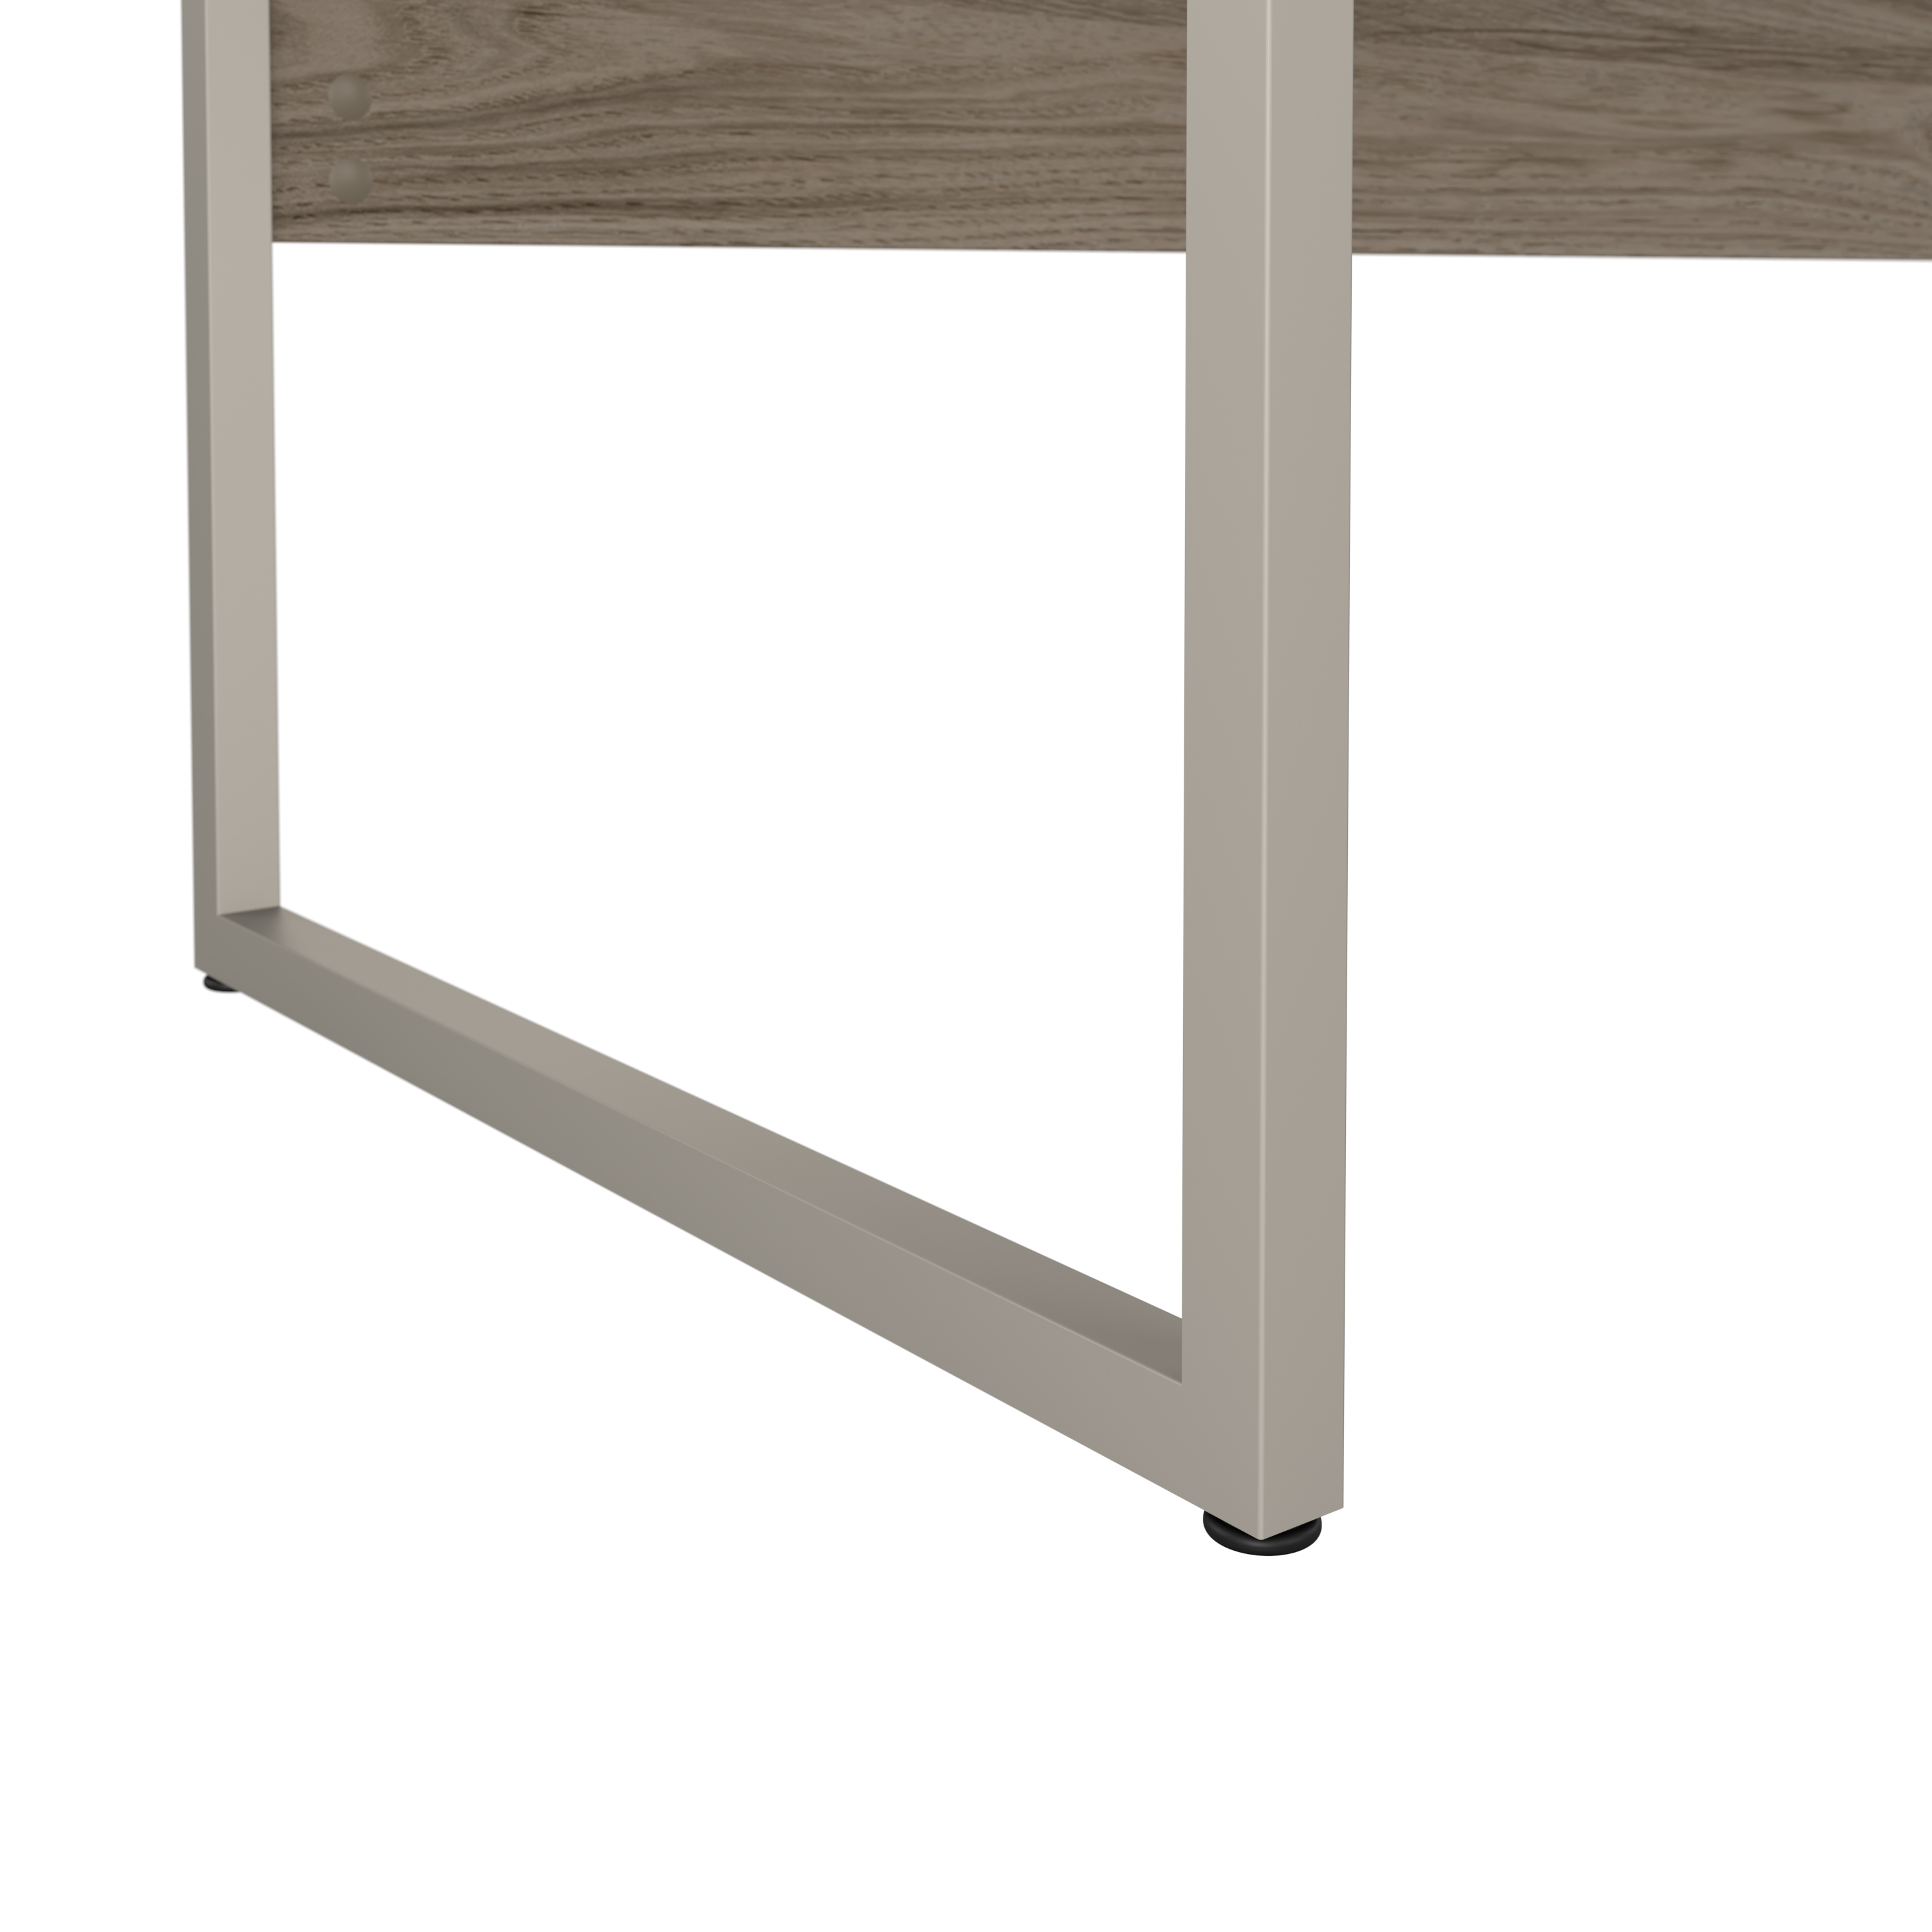 Shop Bush Business Furniture Hybrid 72W x 36D Computer Table Desk with Metal Legs 04 HYD172MH #color_modern hickory